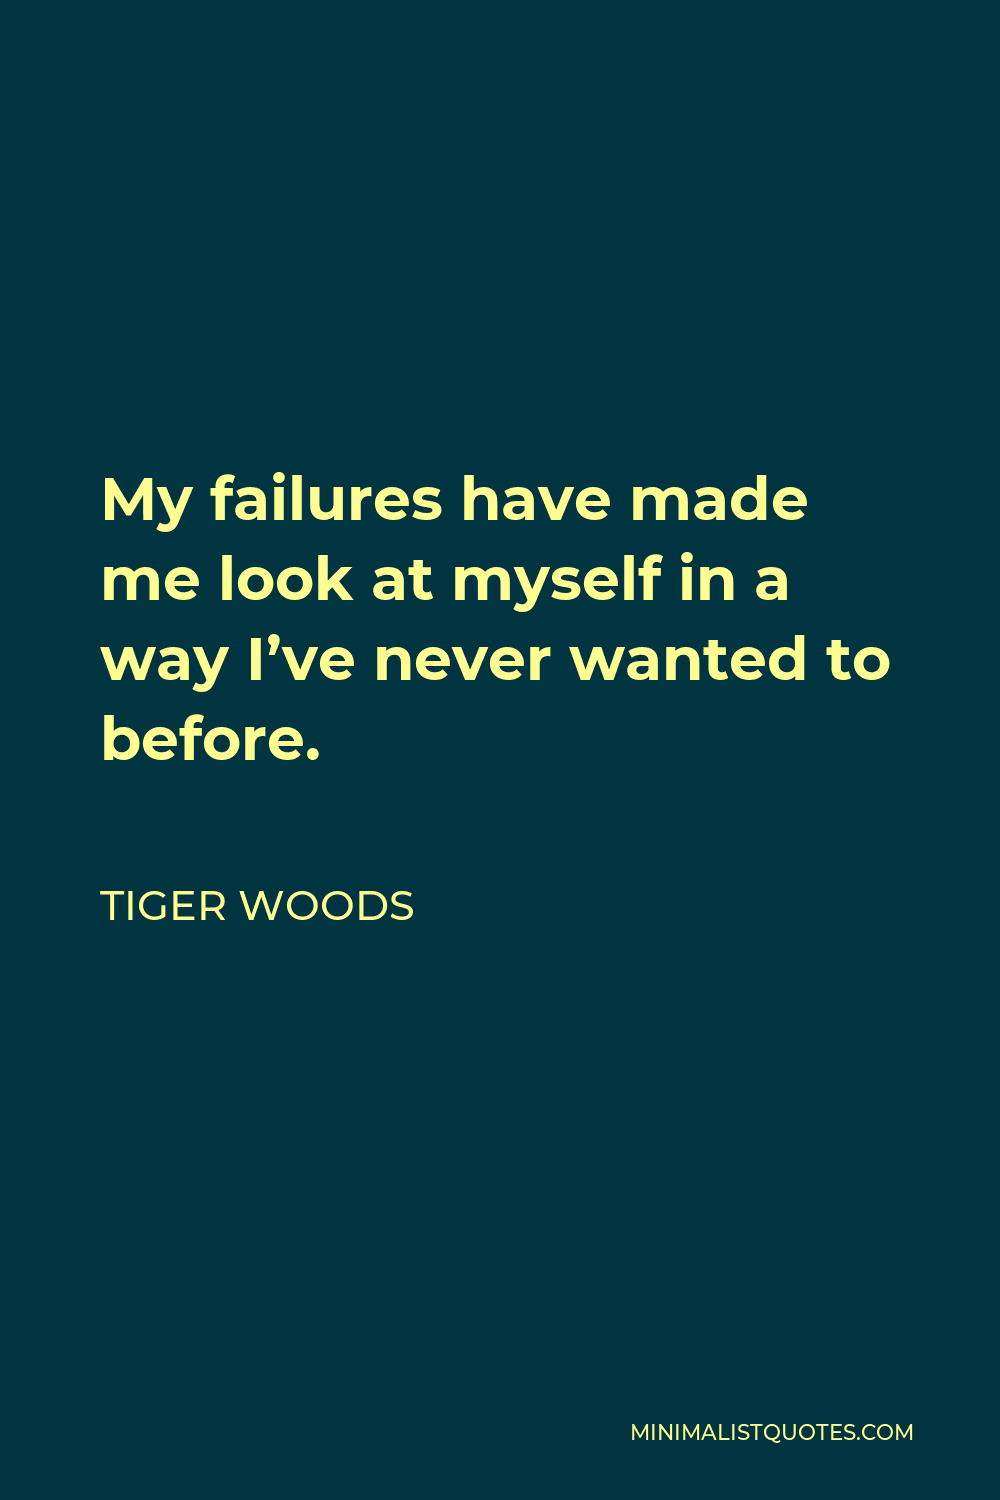 Tiger Woods Quote - My failures have made me look at myself in a way I’ve never wanted to before.